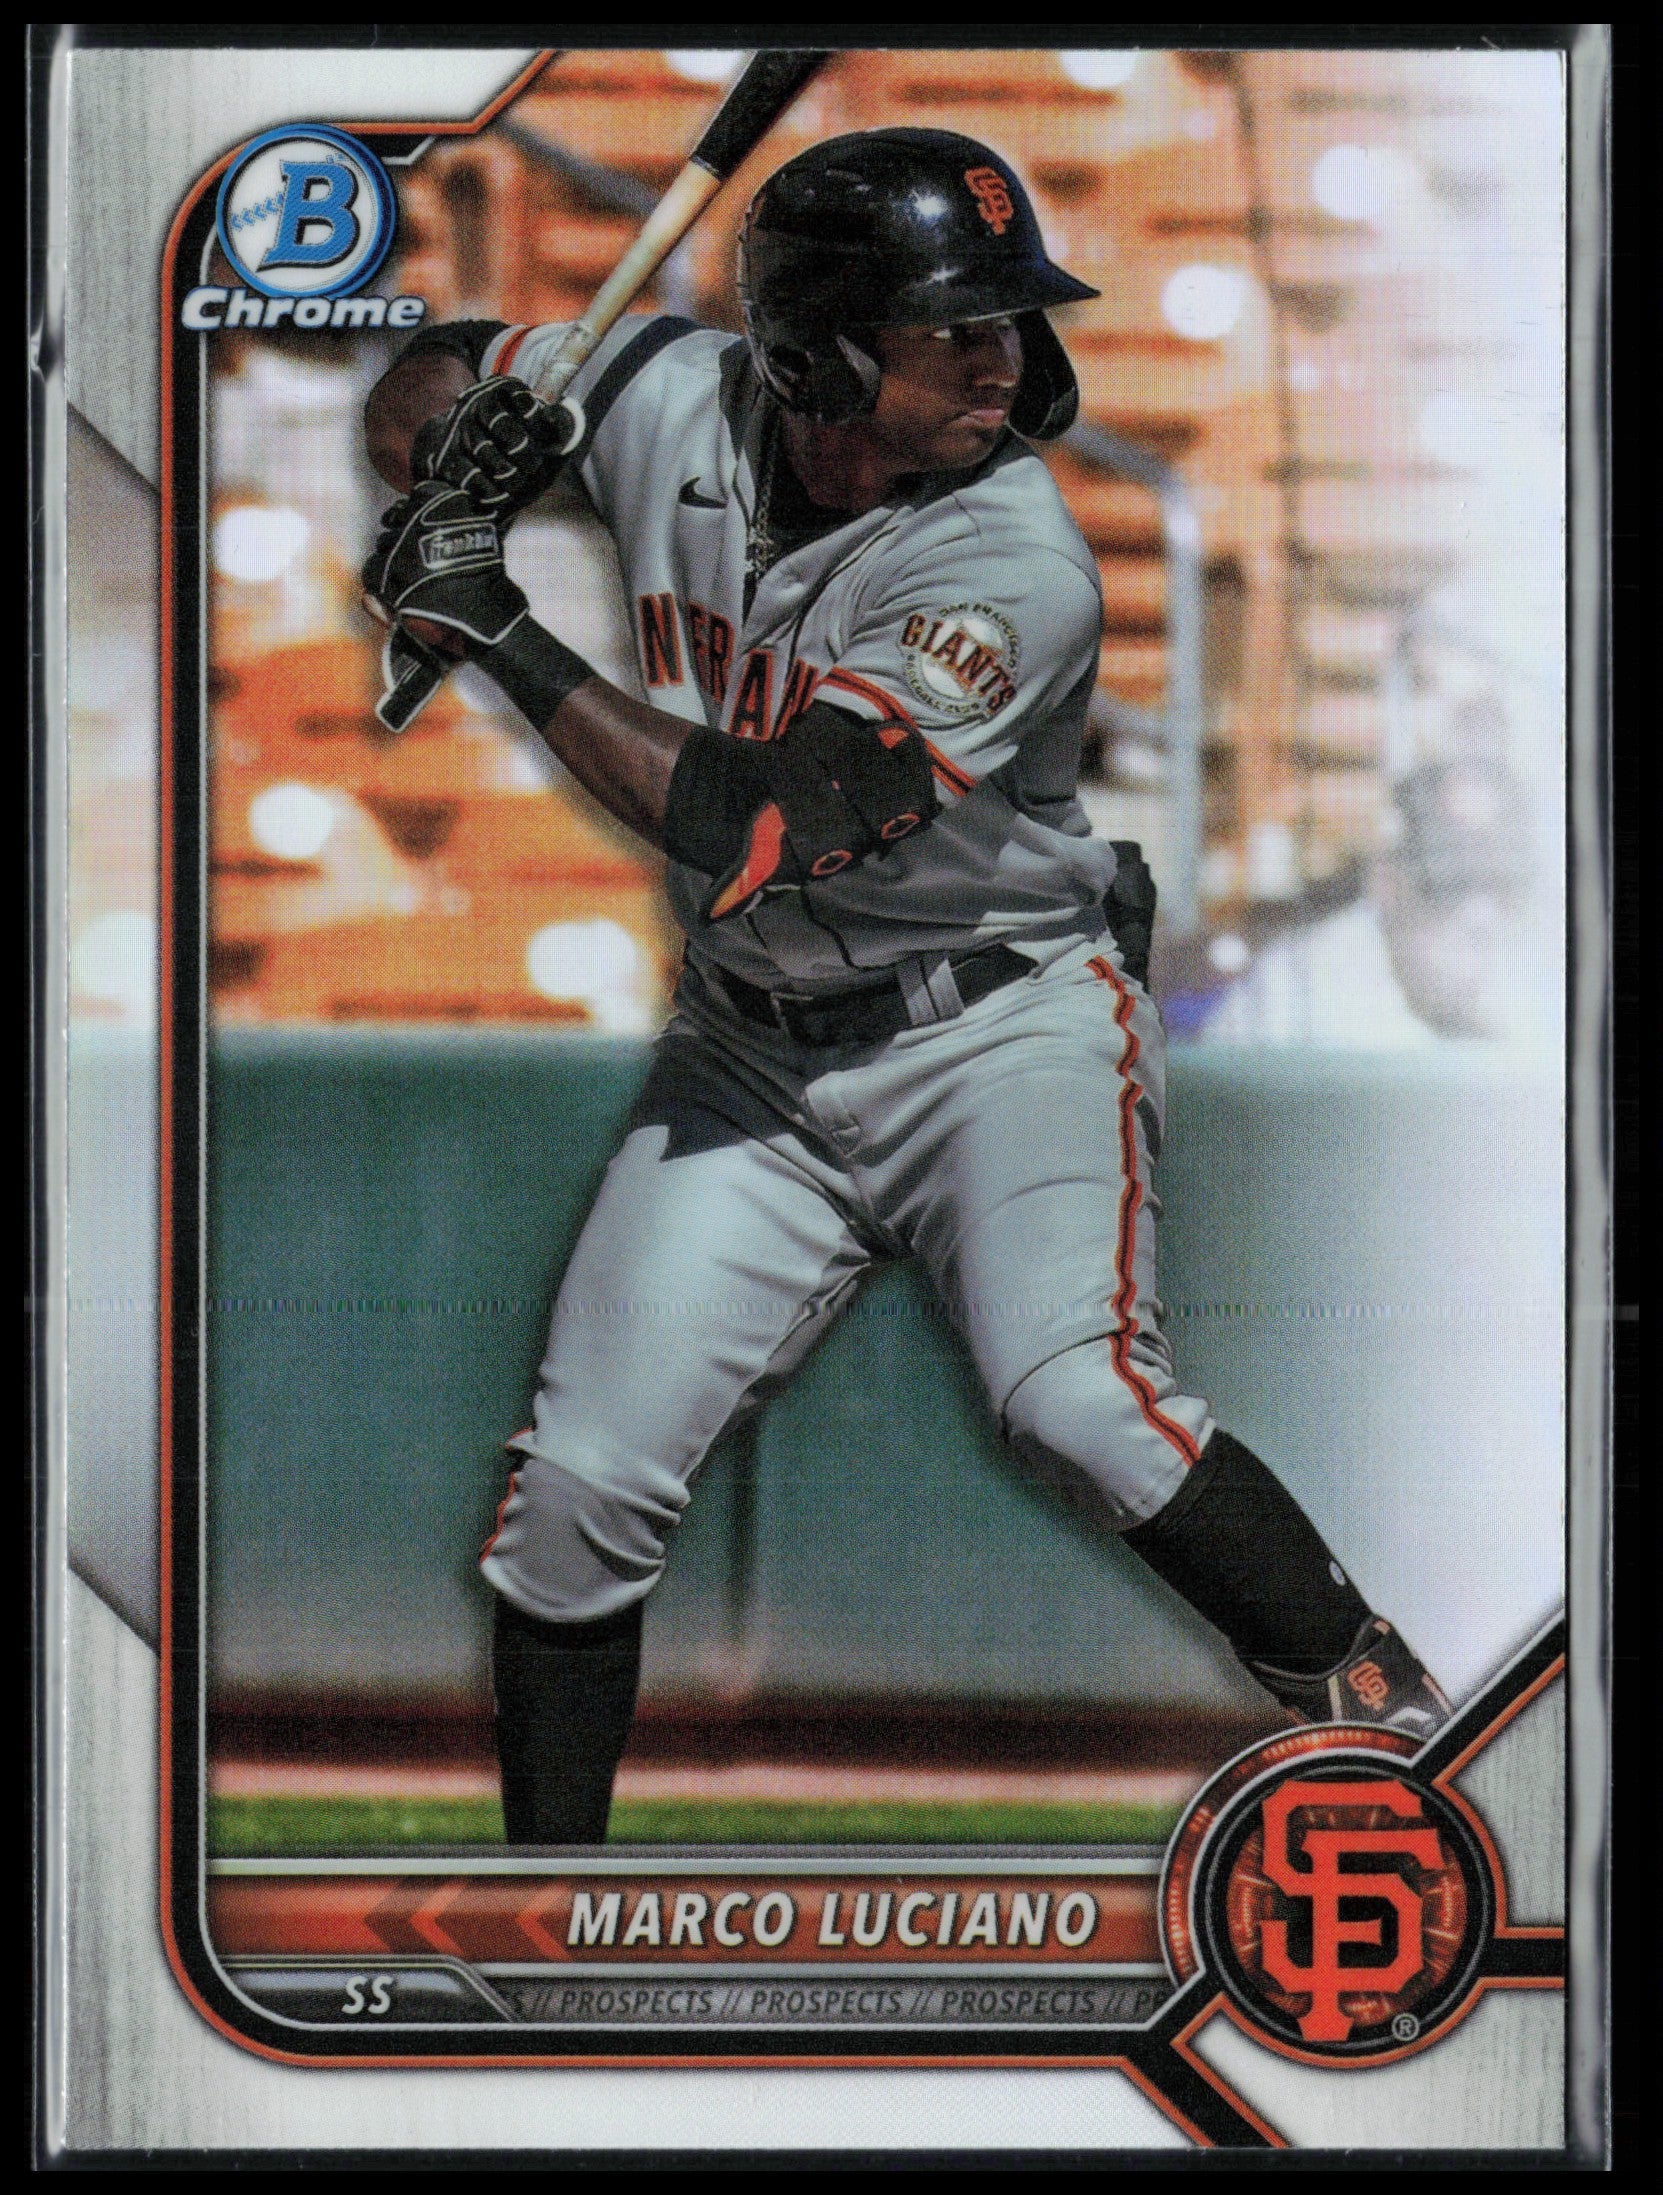 Marco Luciano Prospects Refractor – Dollar Box